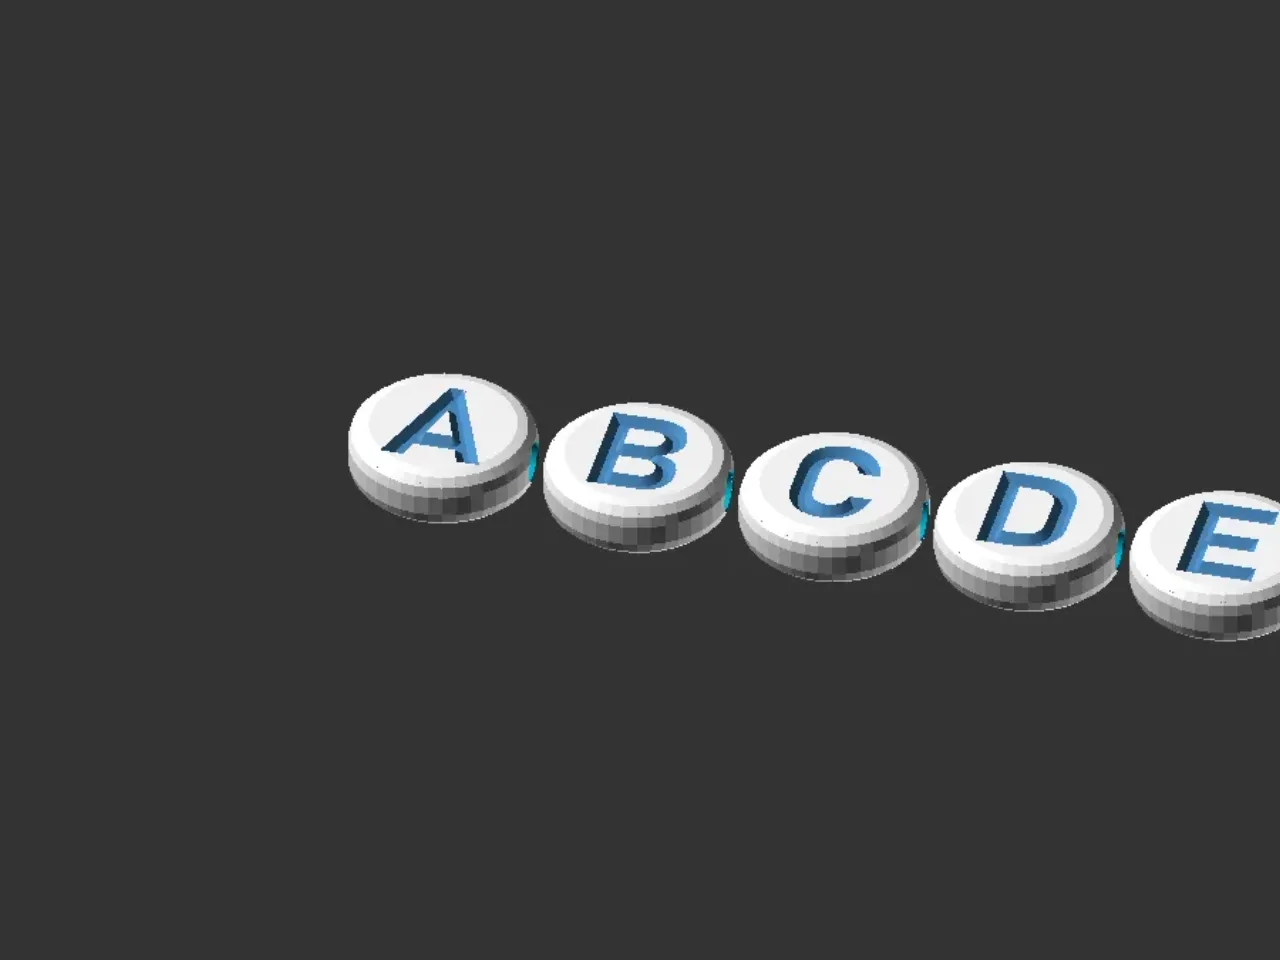 Bead Letters PSD, 40,000+ High Quality Free PSD Templates for Download